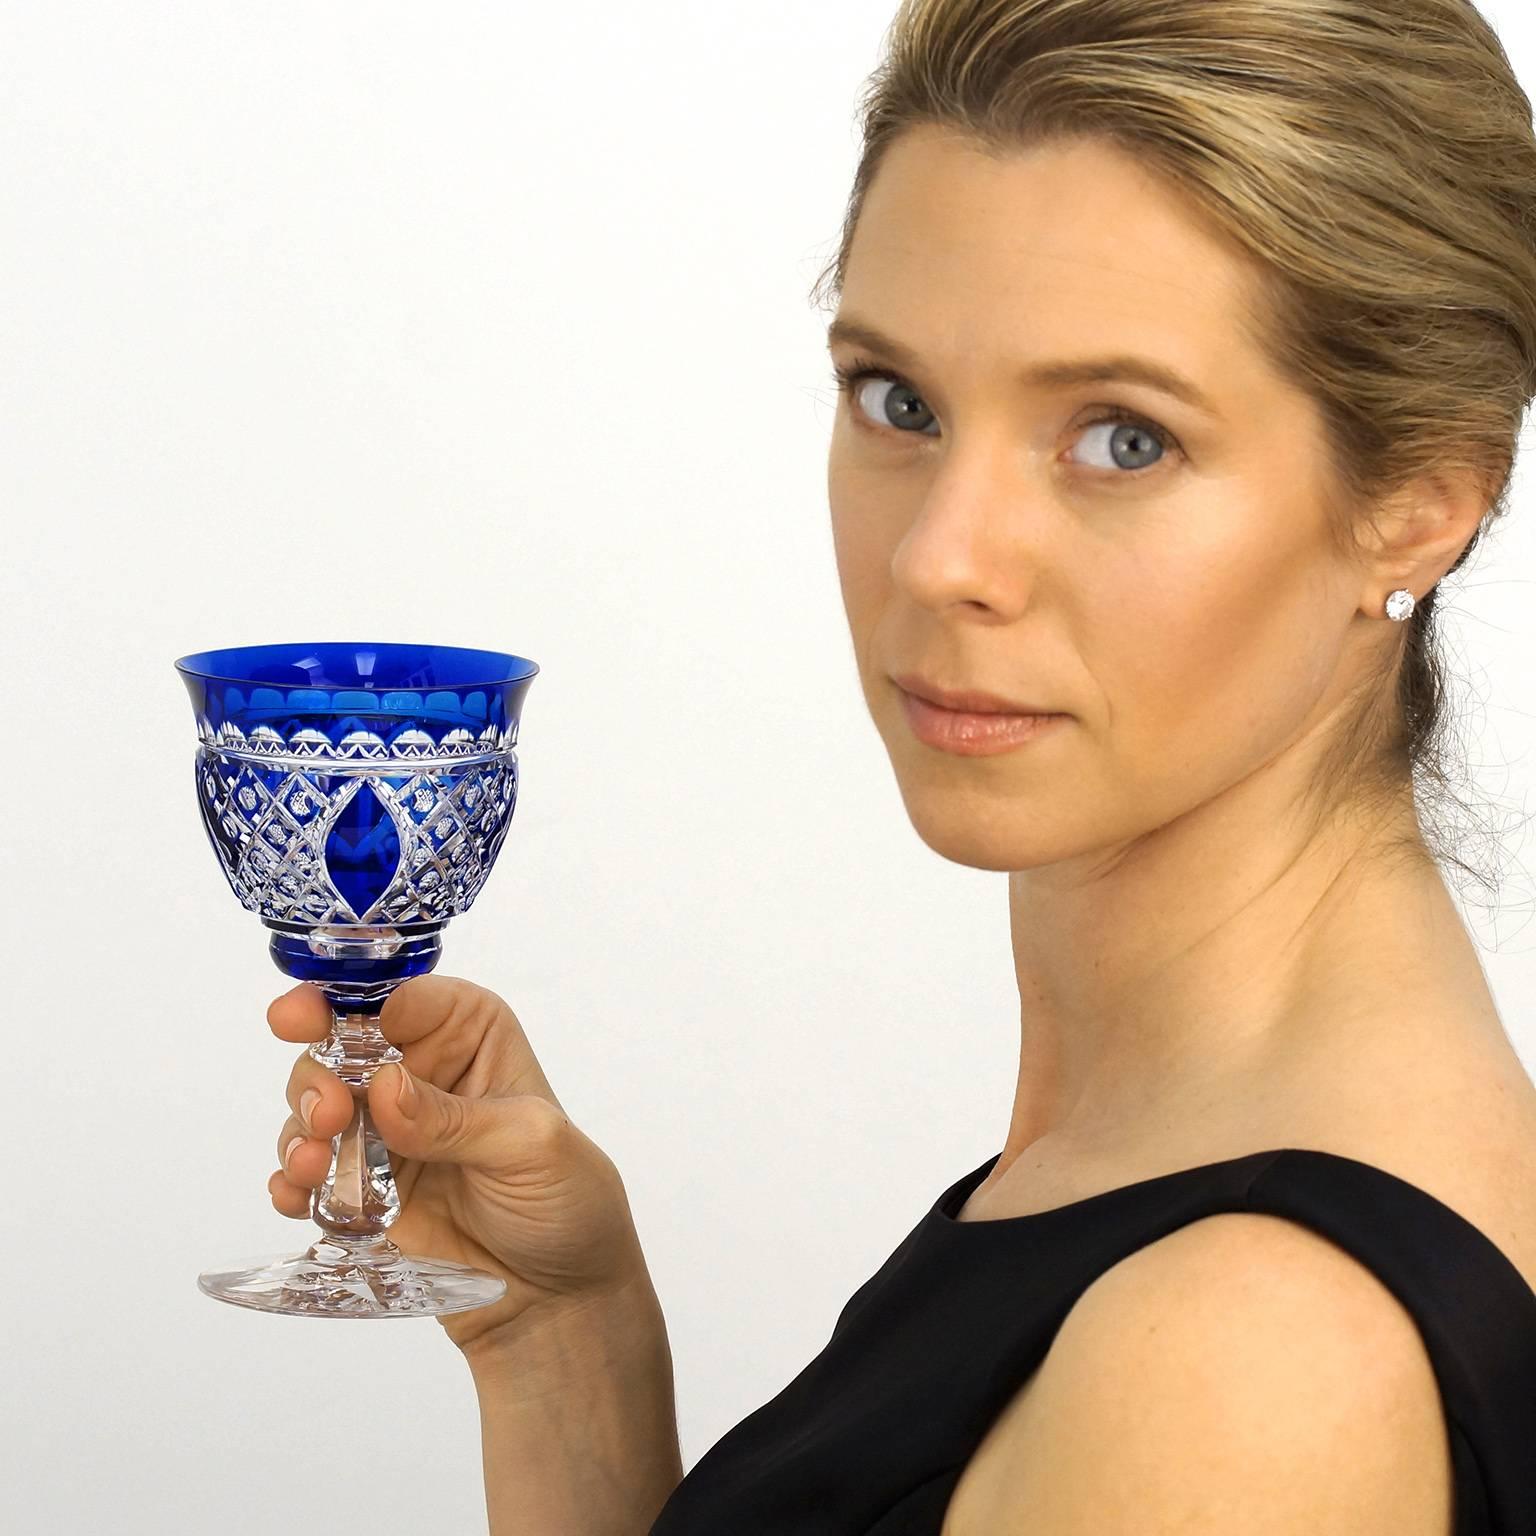 Circa 1930s, by Val St. Lambert, Belgium.  This set of 18 spectacular cobalt blue cut crystal water glasses by Val Saint Lambert of Belgium are superbly cut in a complex and rare pattern. The intense bright cobalt blue completes the visual